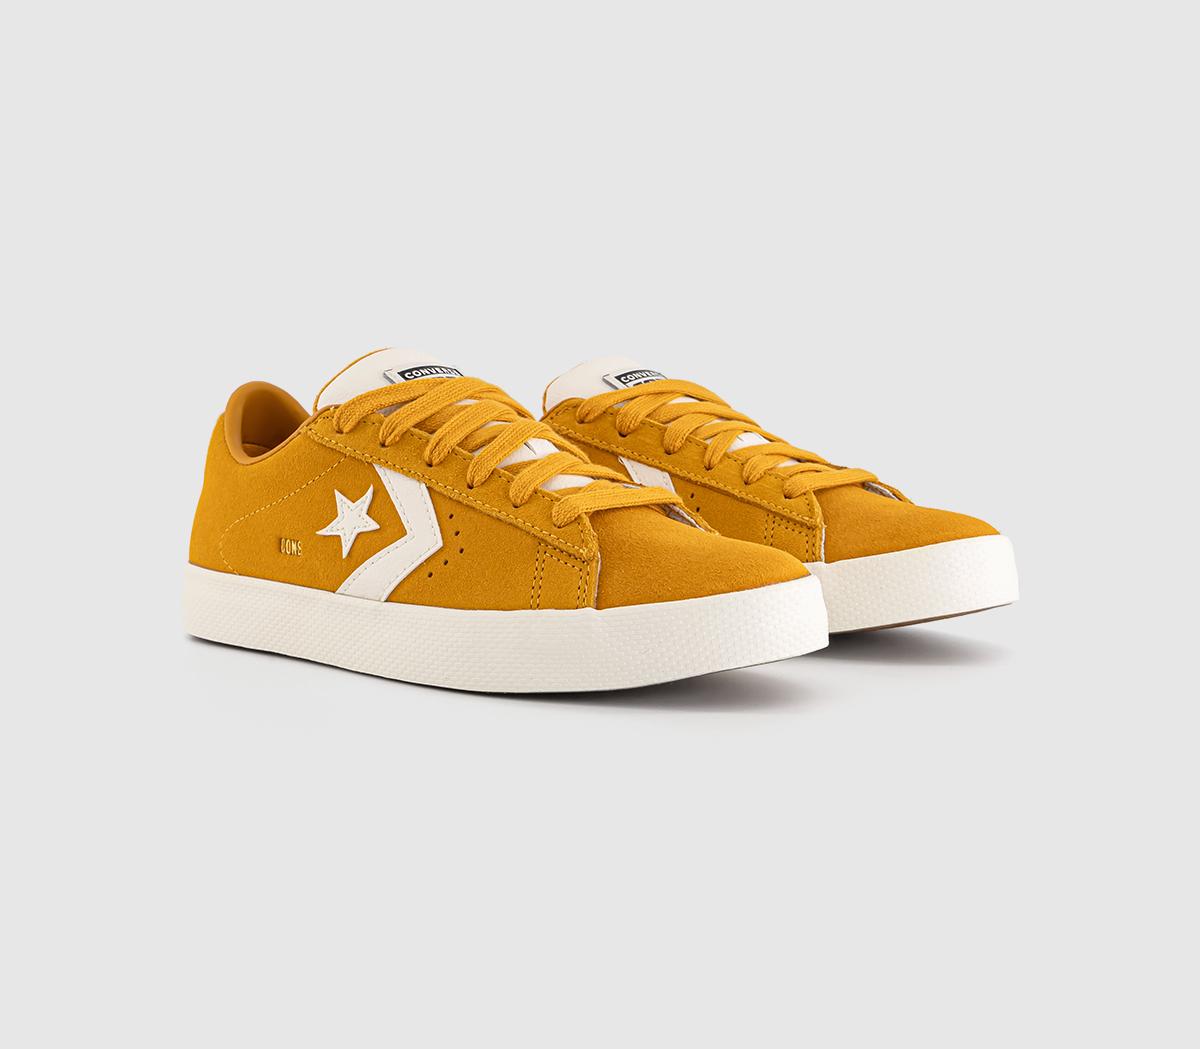 Converse Womens Pl Vulc Pro Ox Trainers Sunflower Gold Egret Yellow, 8